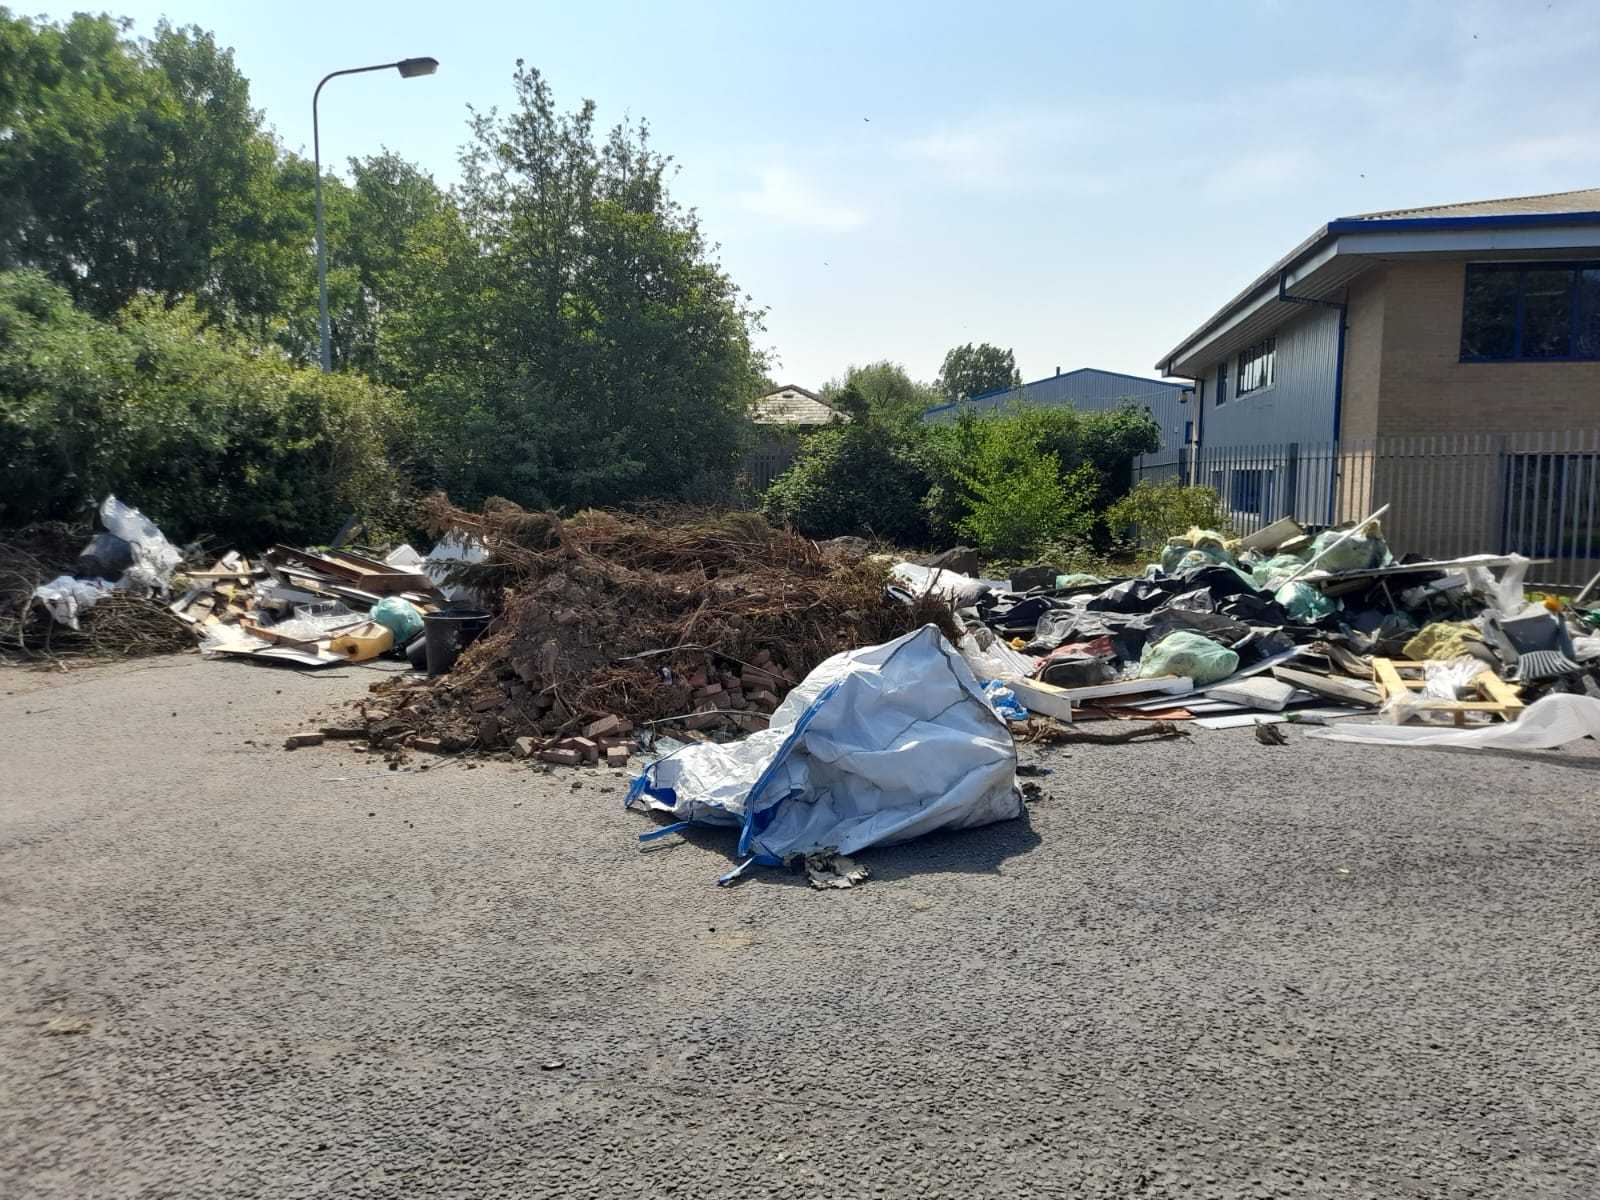 The Cardiff road turned hotspot for fly-tipping, despite repeated calls for action